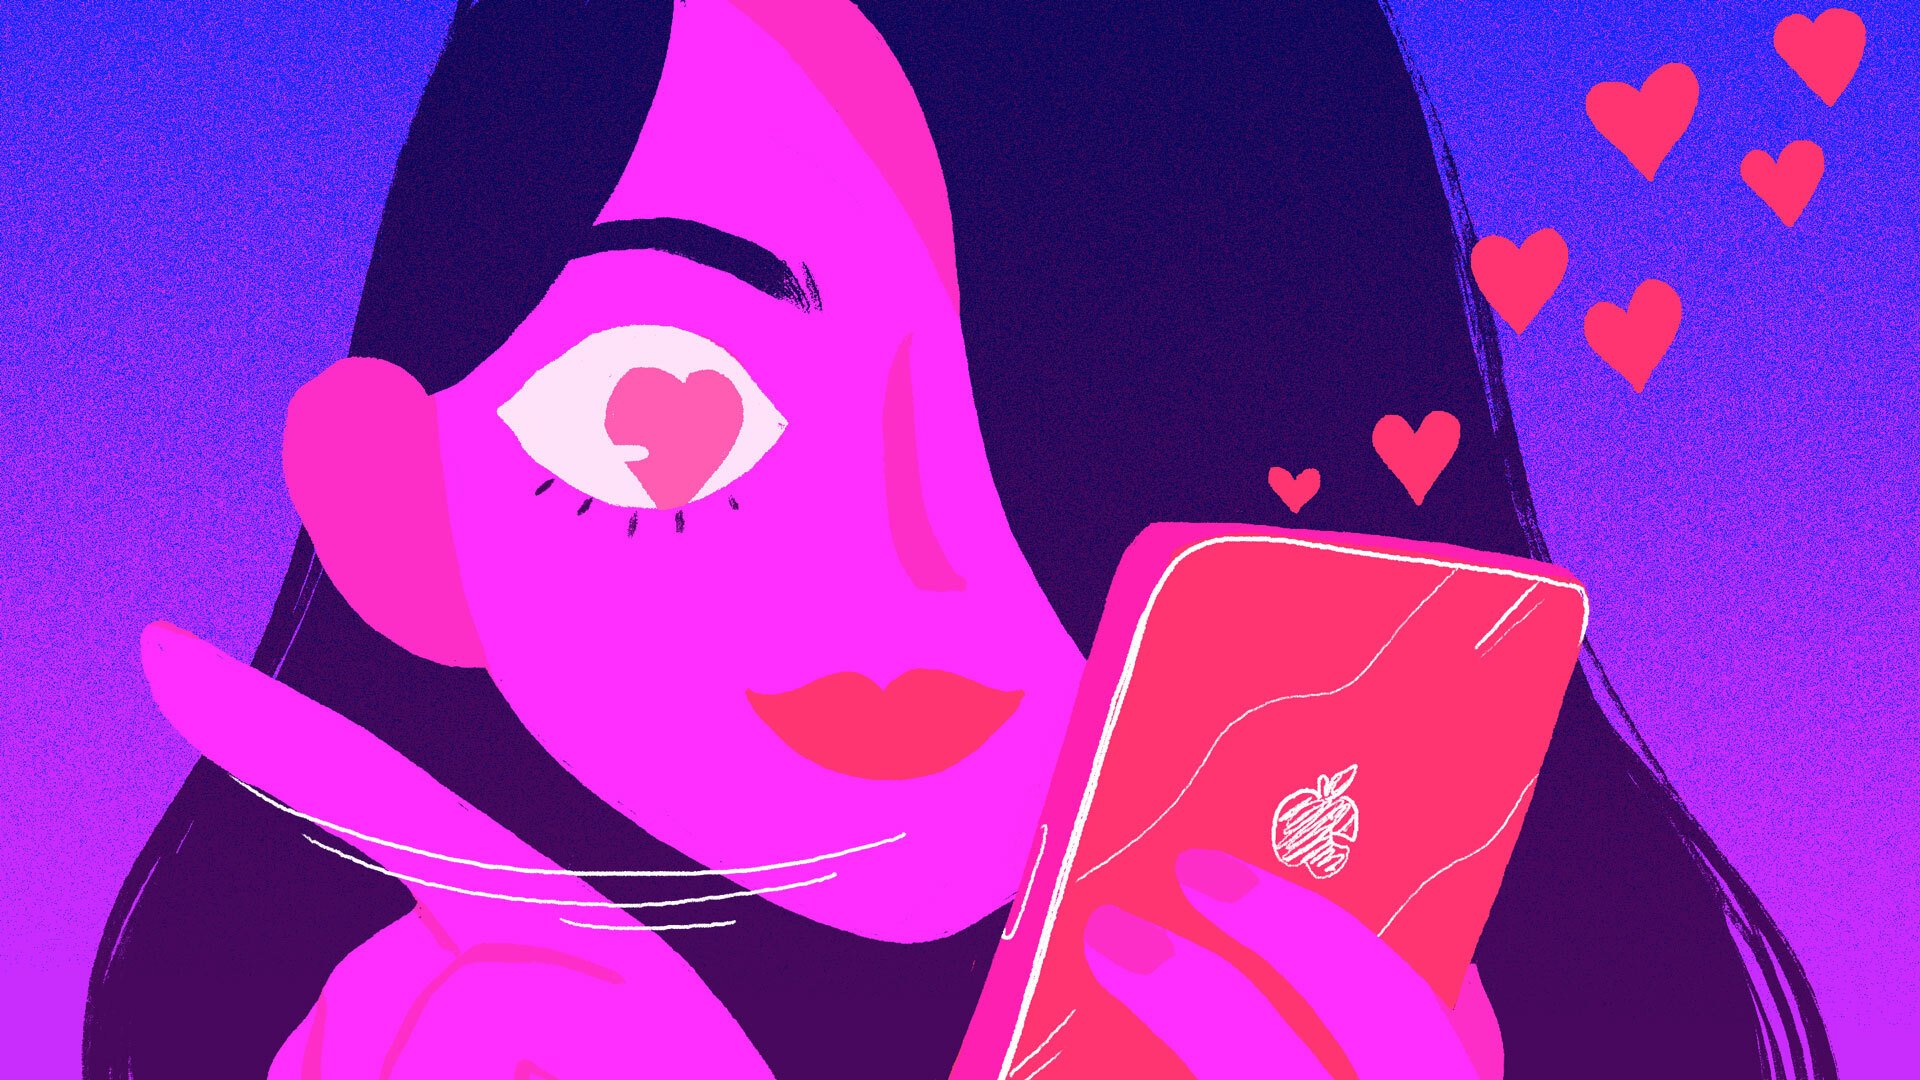 woman swiping on phone, hearts in her eyes and bursting out of the phone